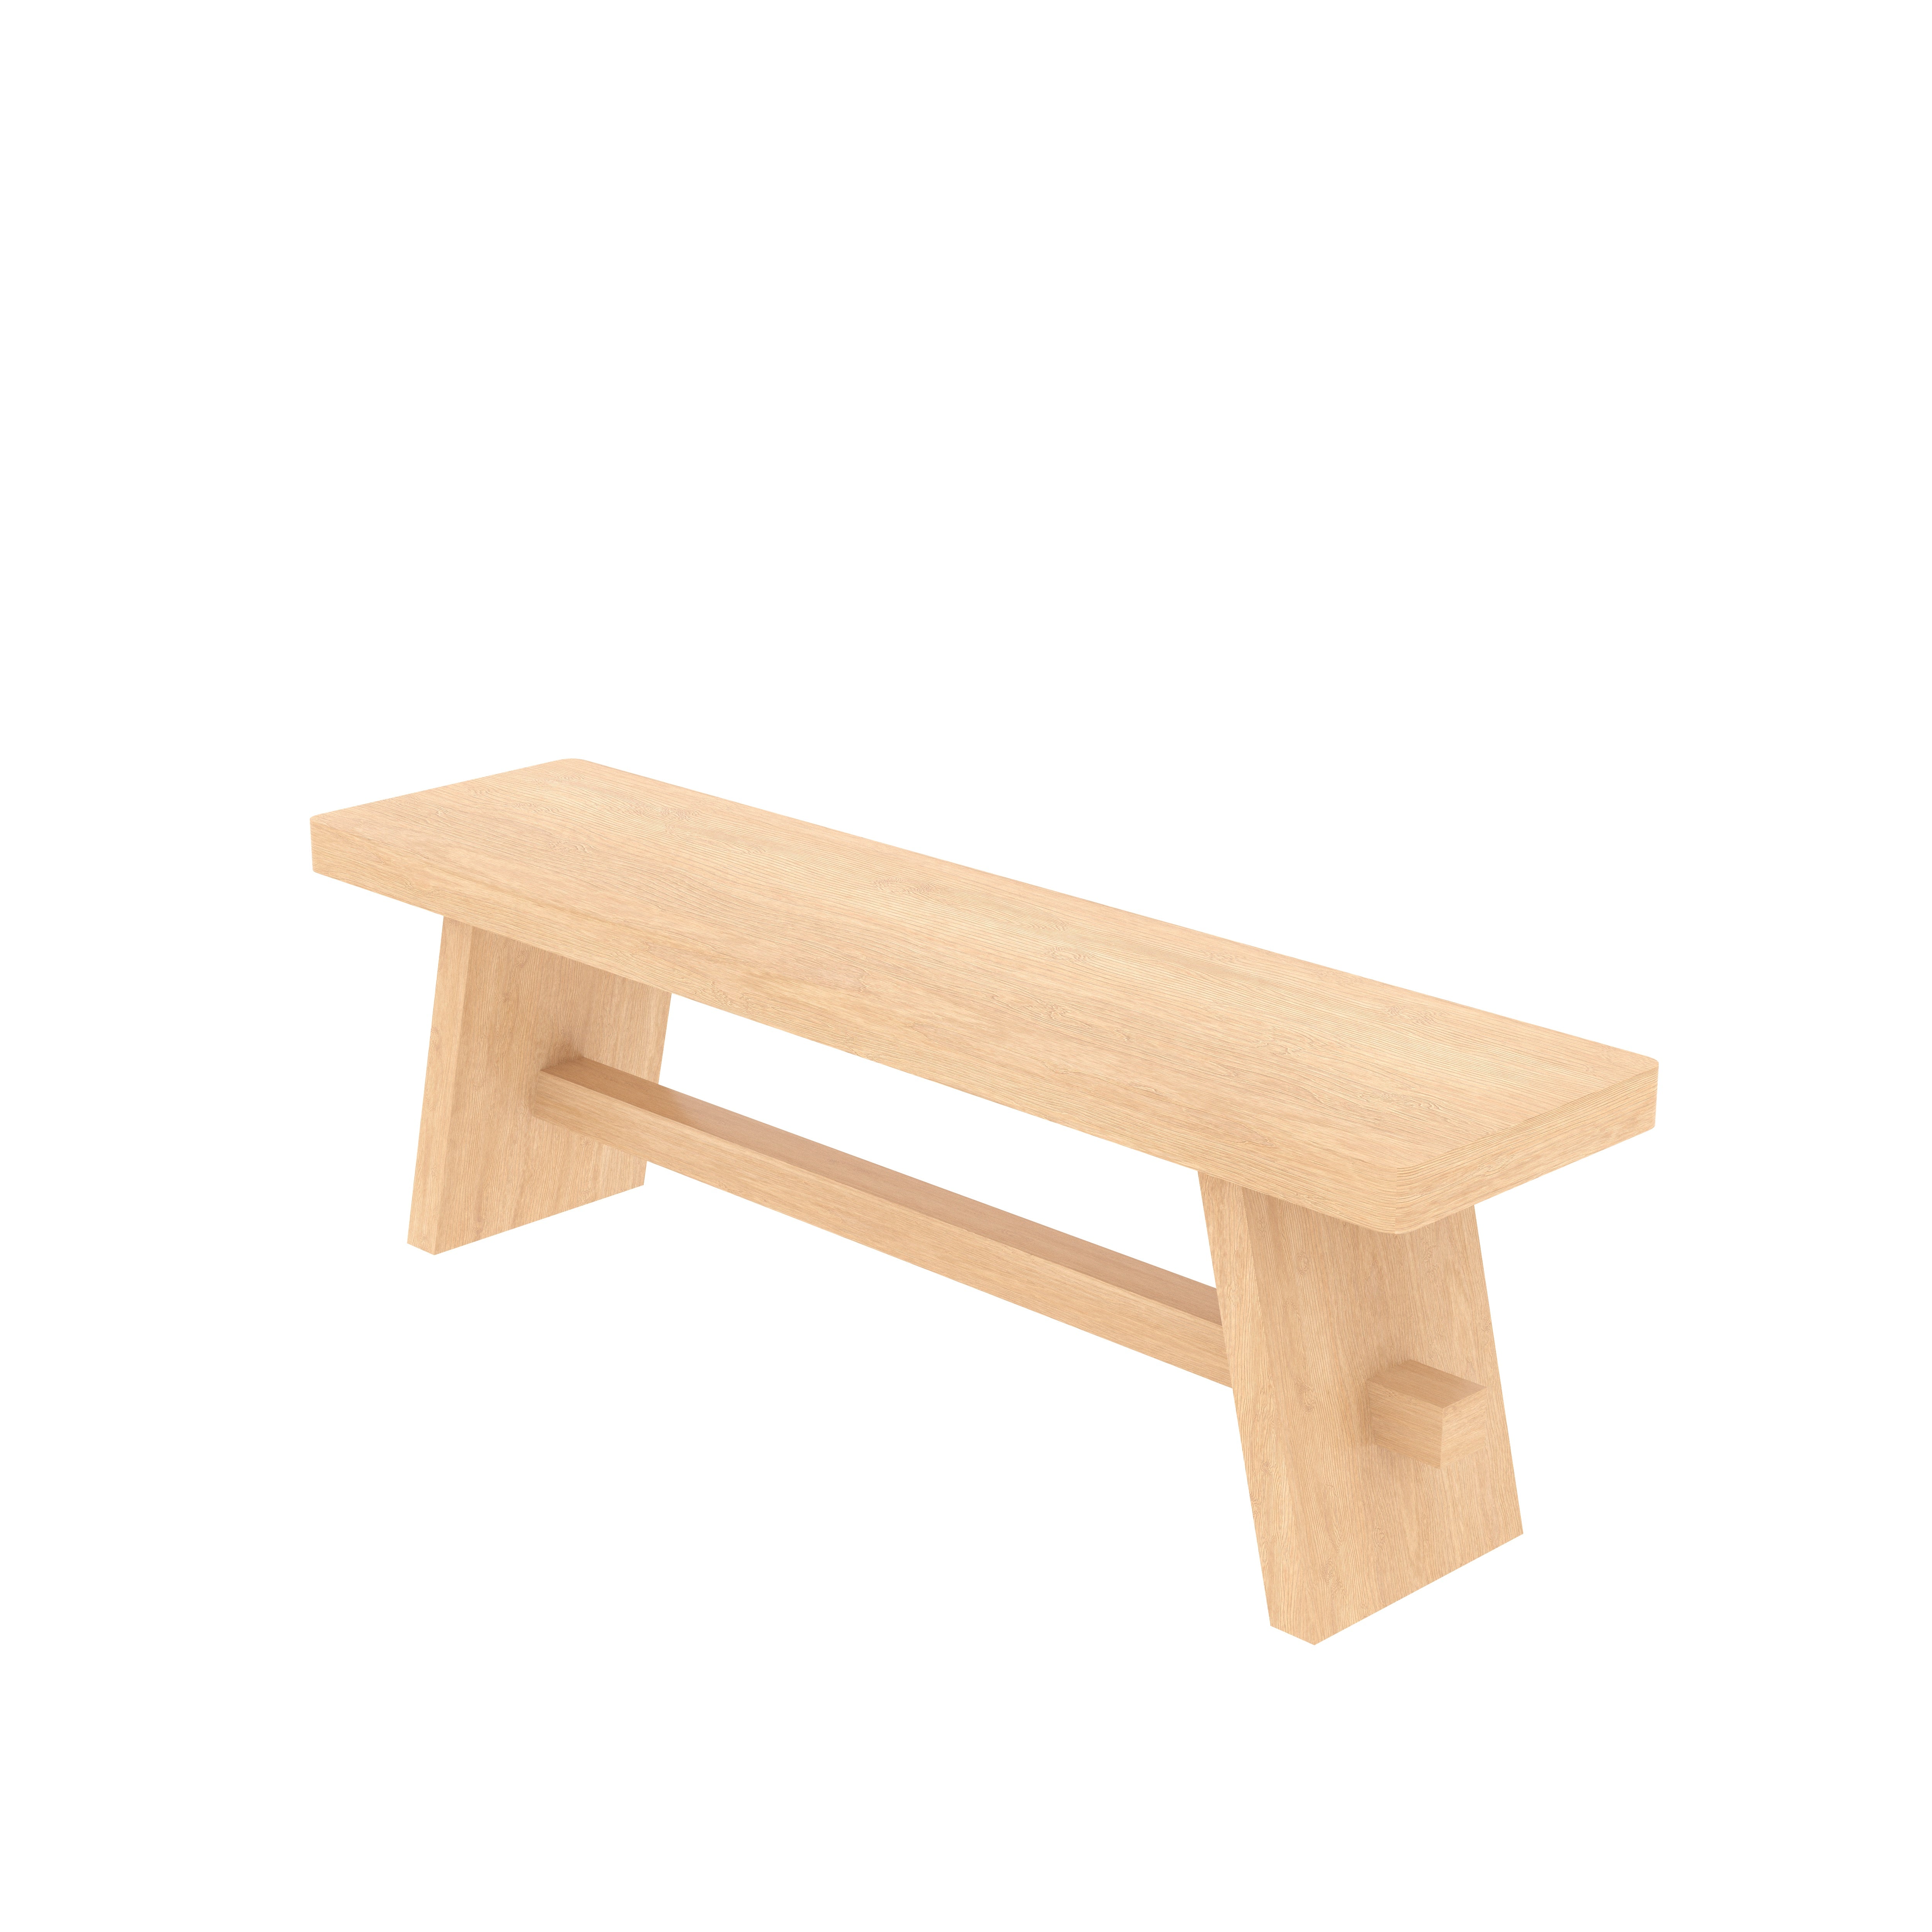 oak wood outdoor sitting table Bench